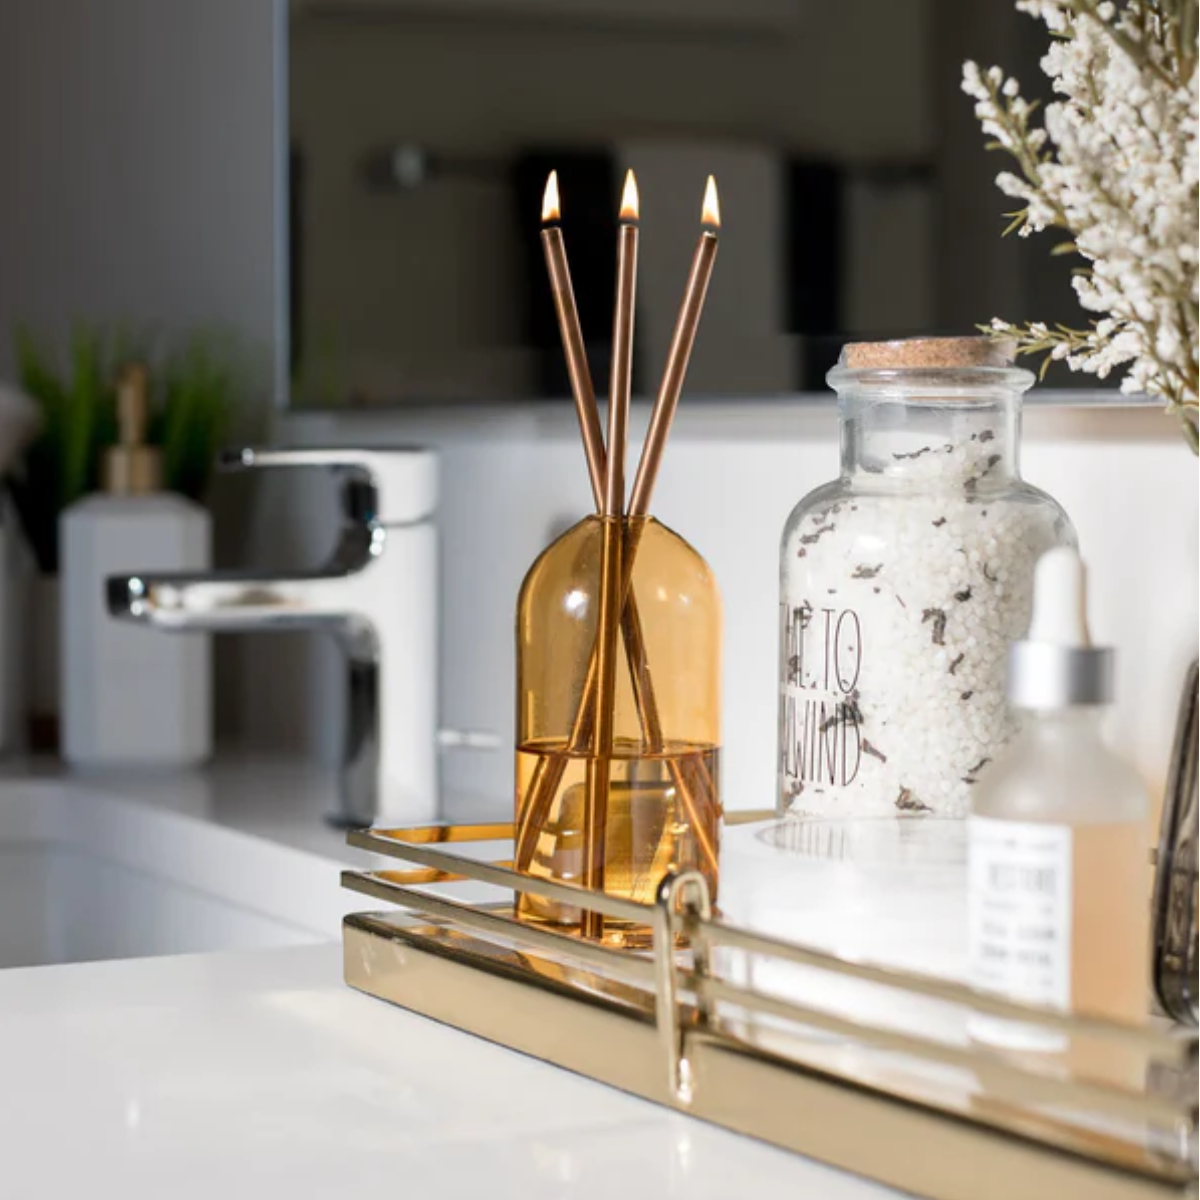 GOLDEN HOUR VASE by EVERLASTING CANDLE CO.